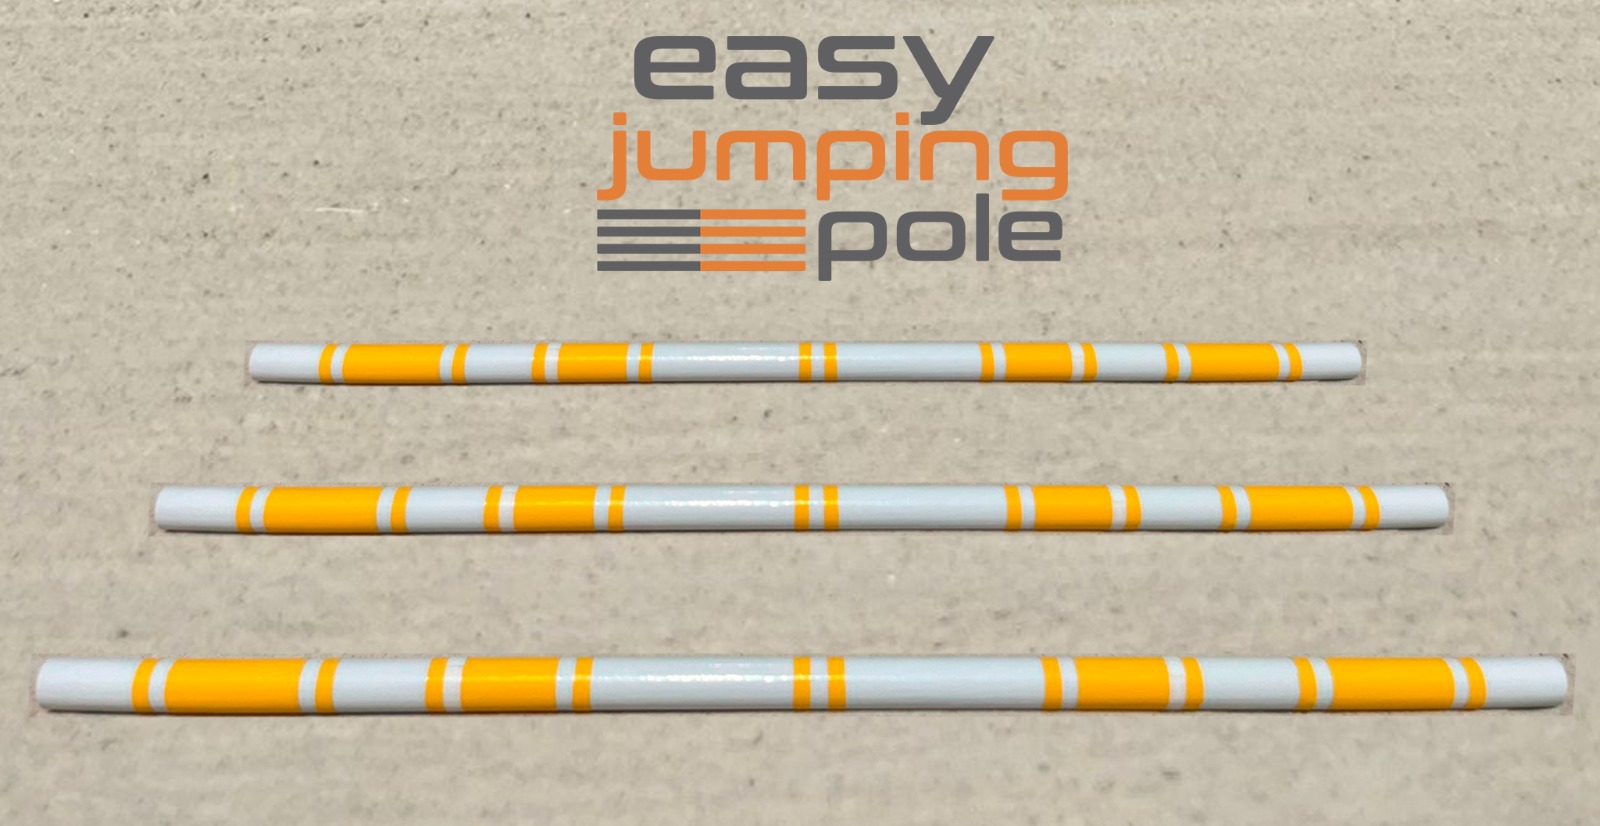 Easy jumping pole Model A-9